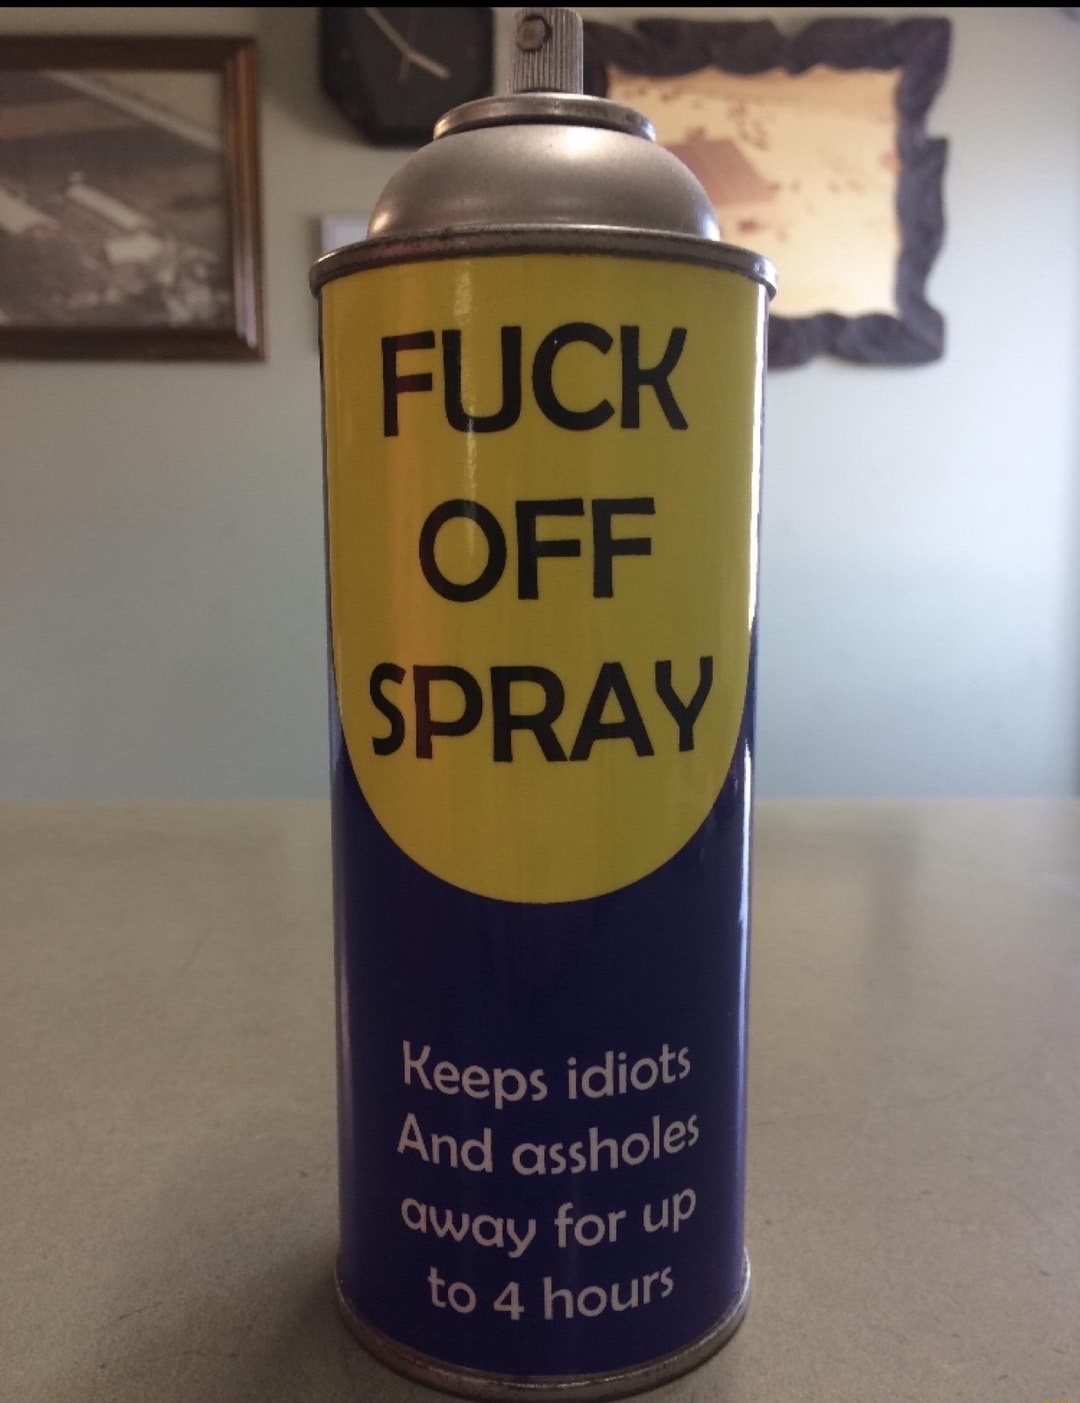 spray - Fuck Off Spray Keeps idiots And assholes away for up to 4 hours